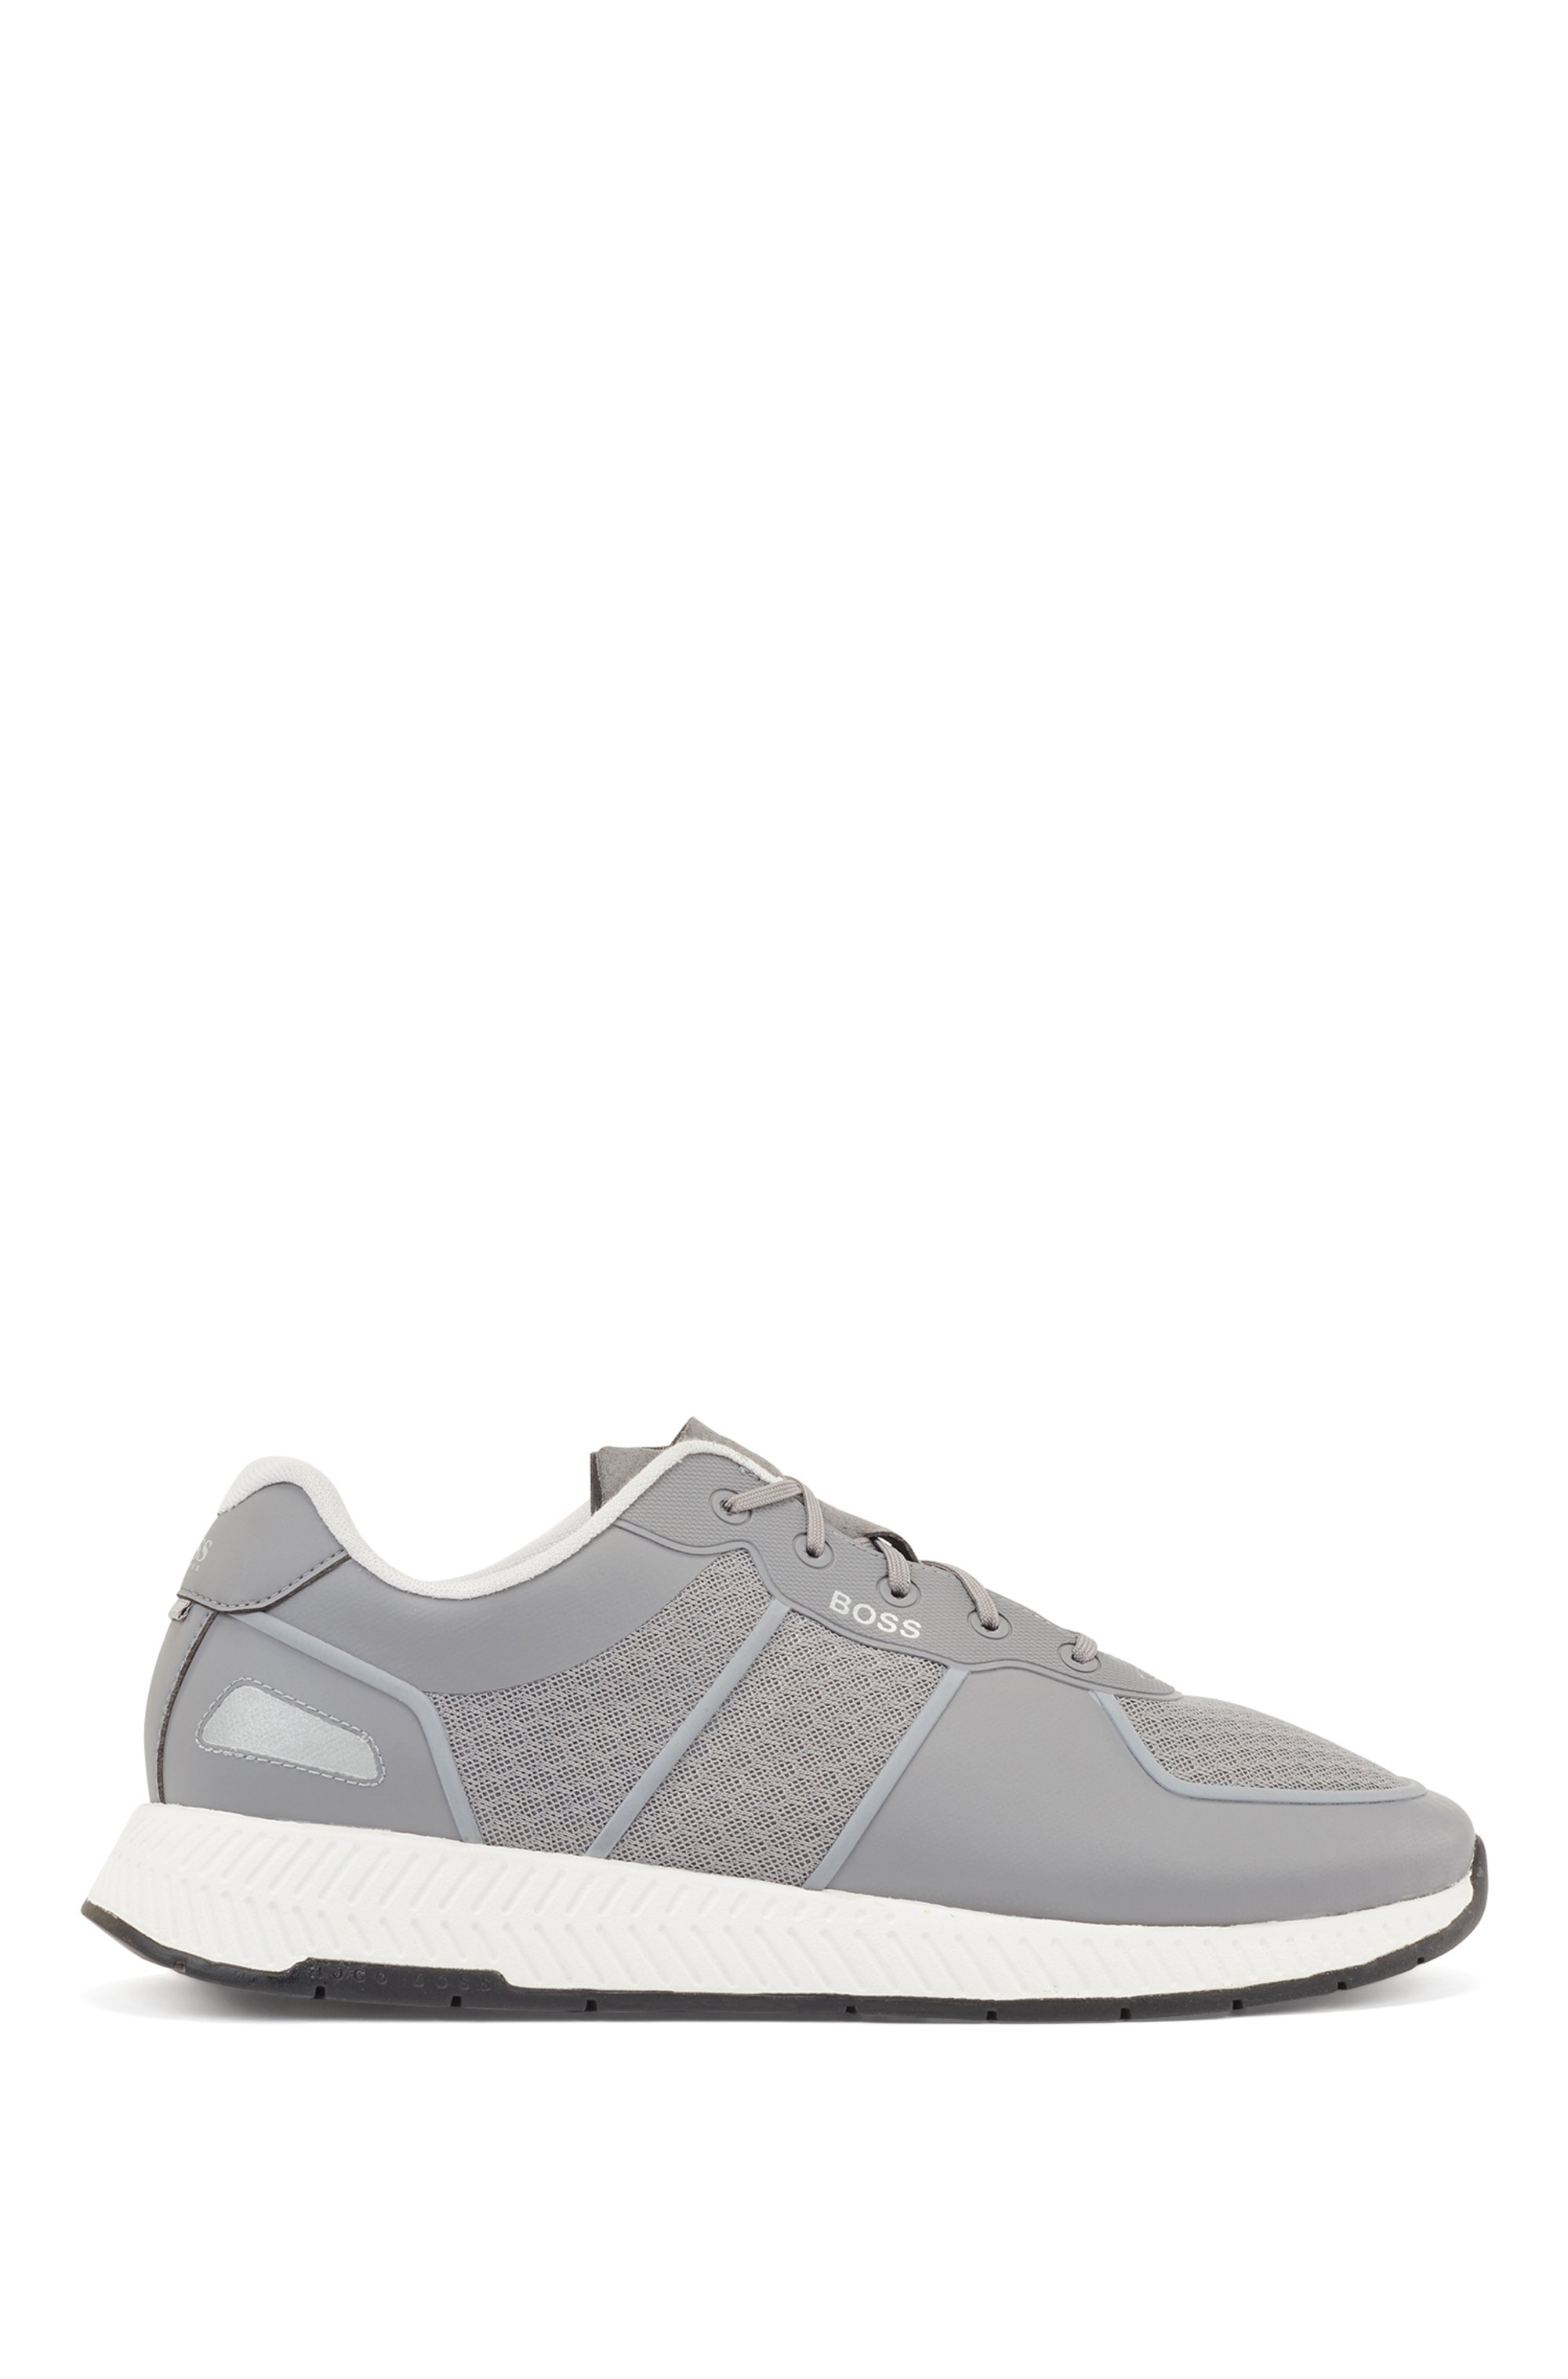 Hybrid trainers with reflective accents and bamboo-cotton insole, Grey